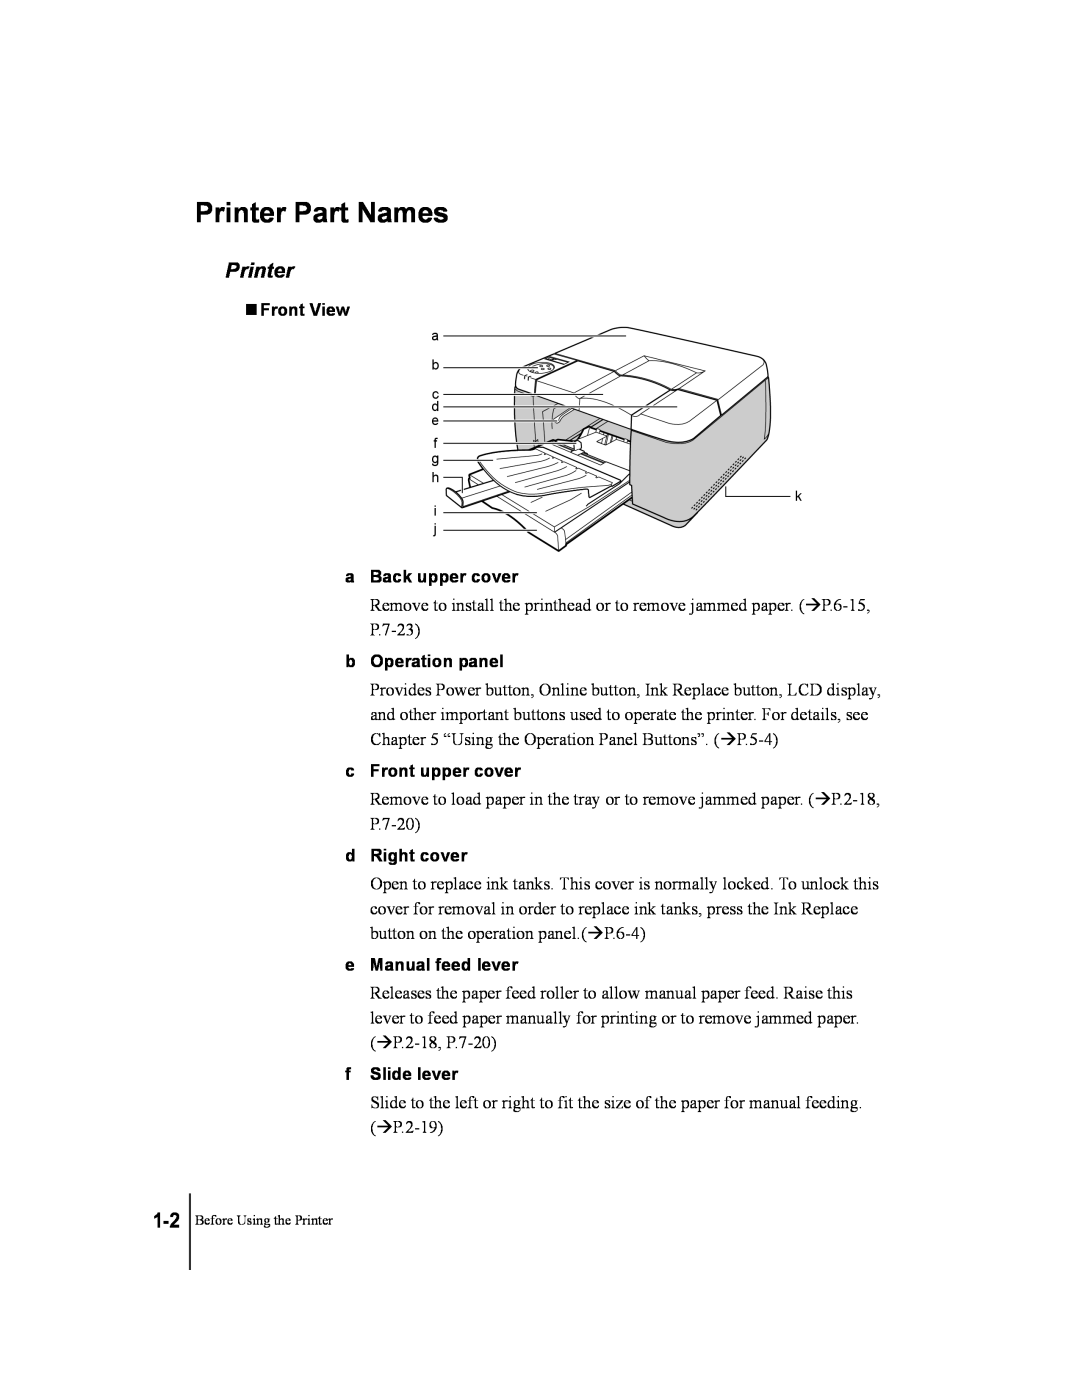 Canon W2200 Printer Part Names, T Front View, a Back upper cover, b Operation panel, c Front upper cover, d Right cover 